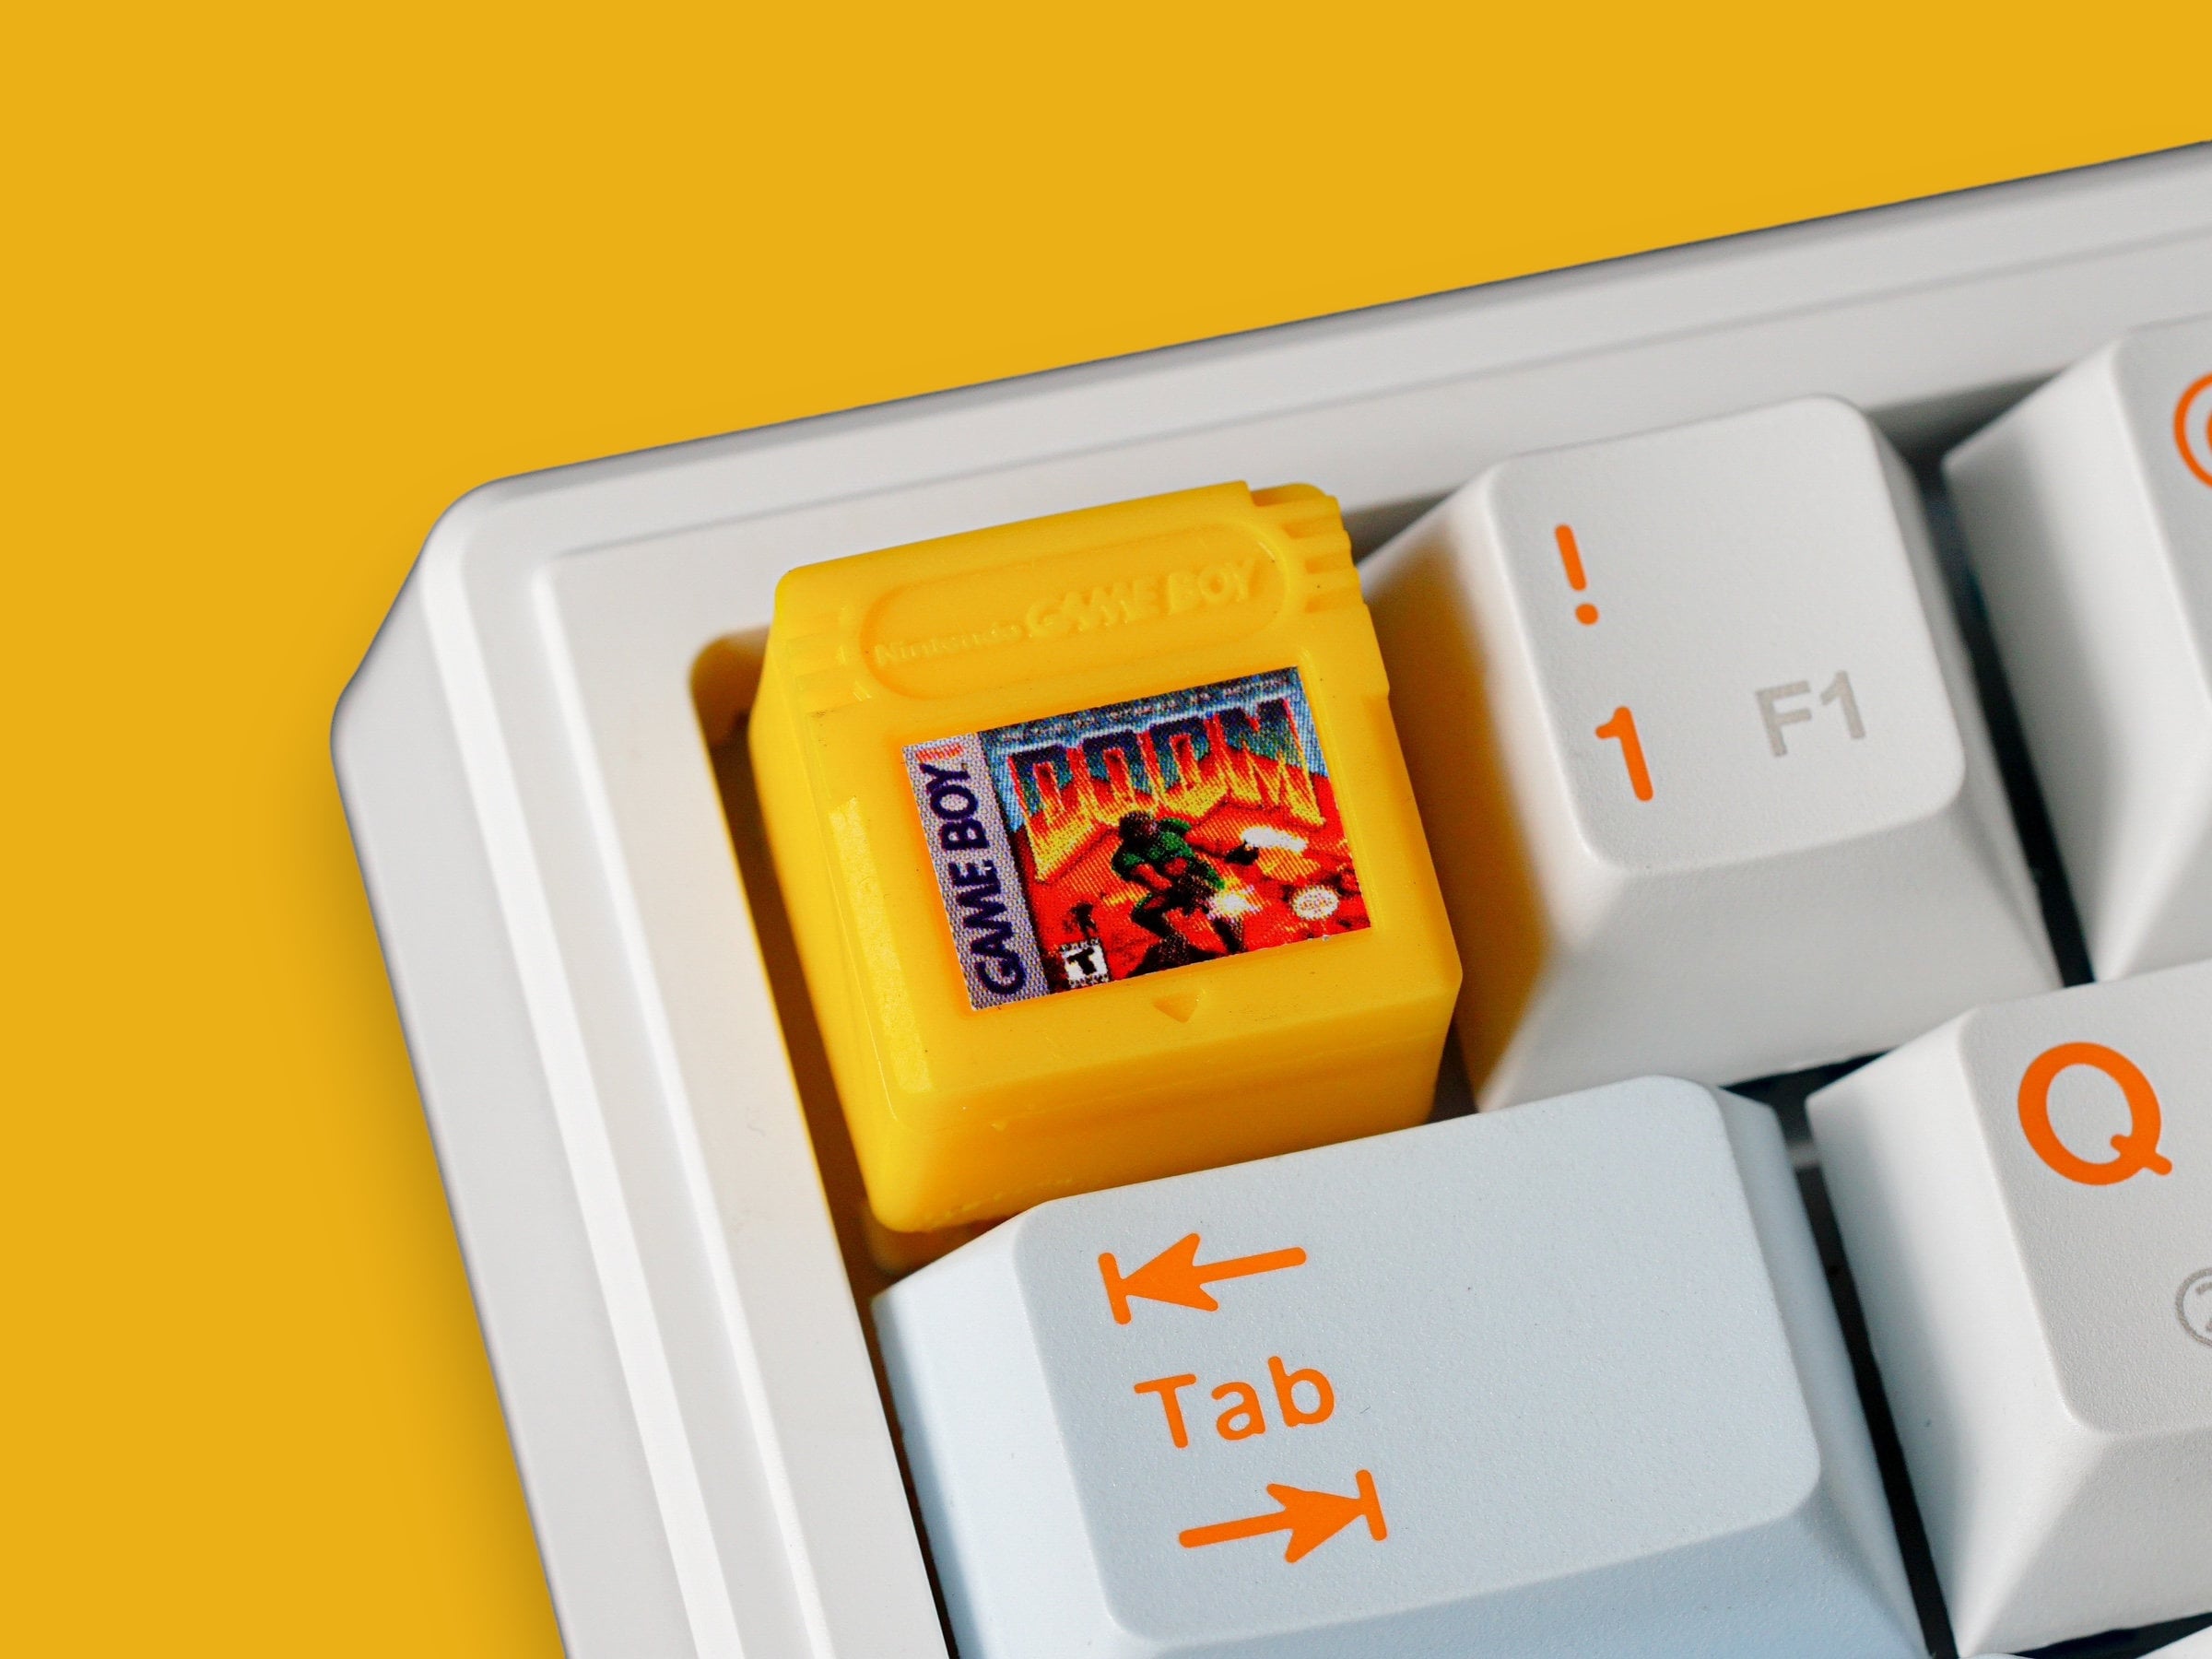 Gameboy Keycap, BOOM Gameboy Keycap, Gaming Keycap, Keycap For Cherry MX Switches Mechanical Keyboard, Gift for Him